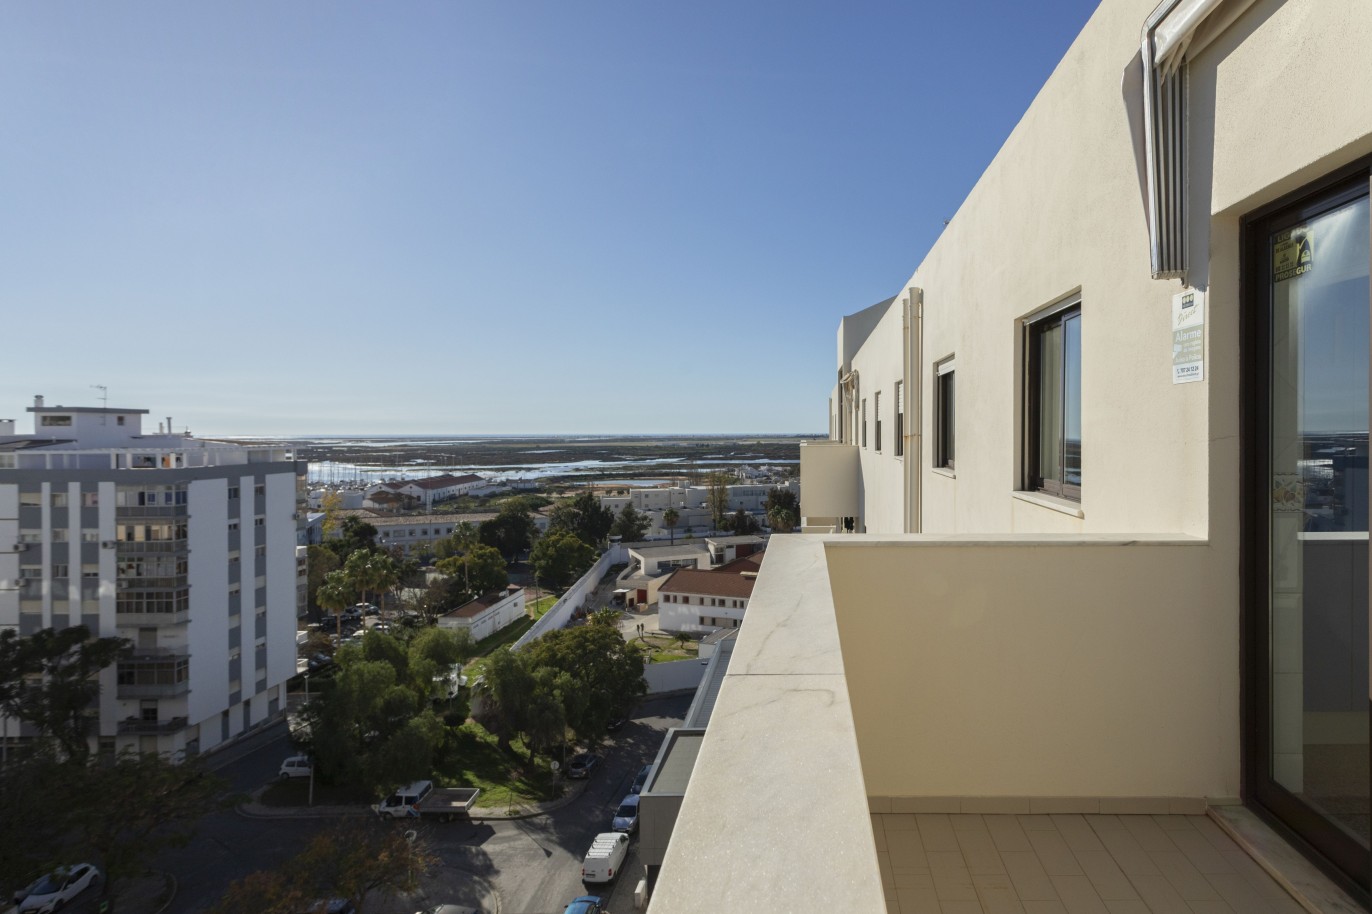 2-bedroom Penthouse with sea view for sale in Faro, Algarve_247890